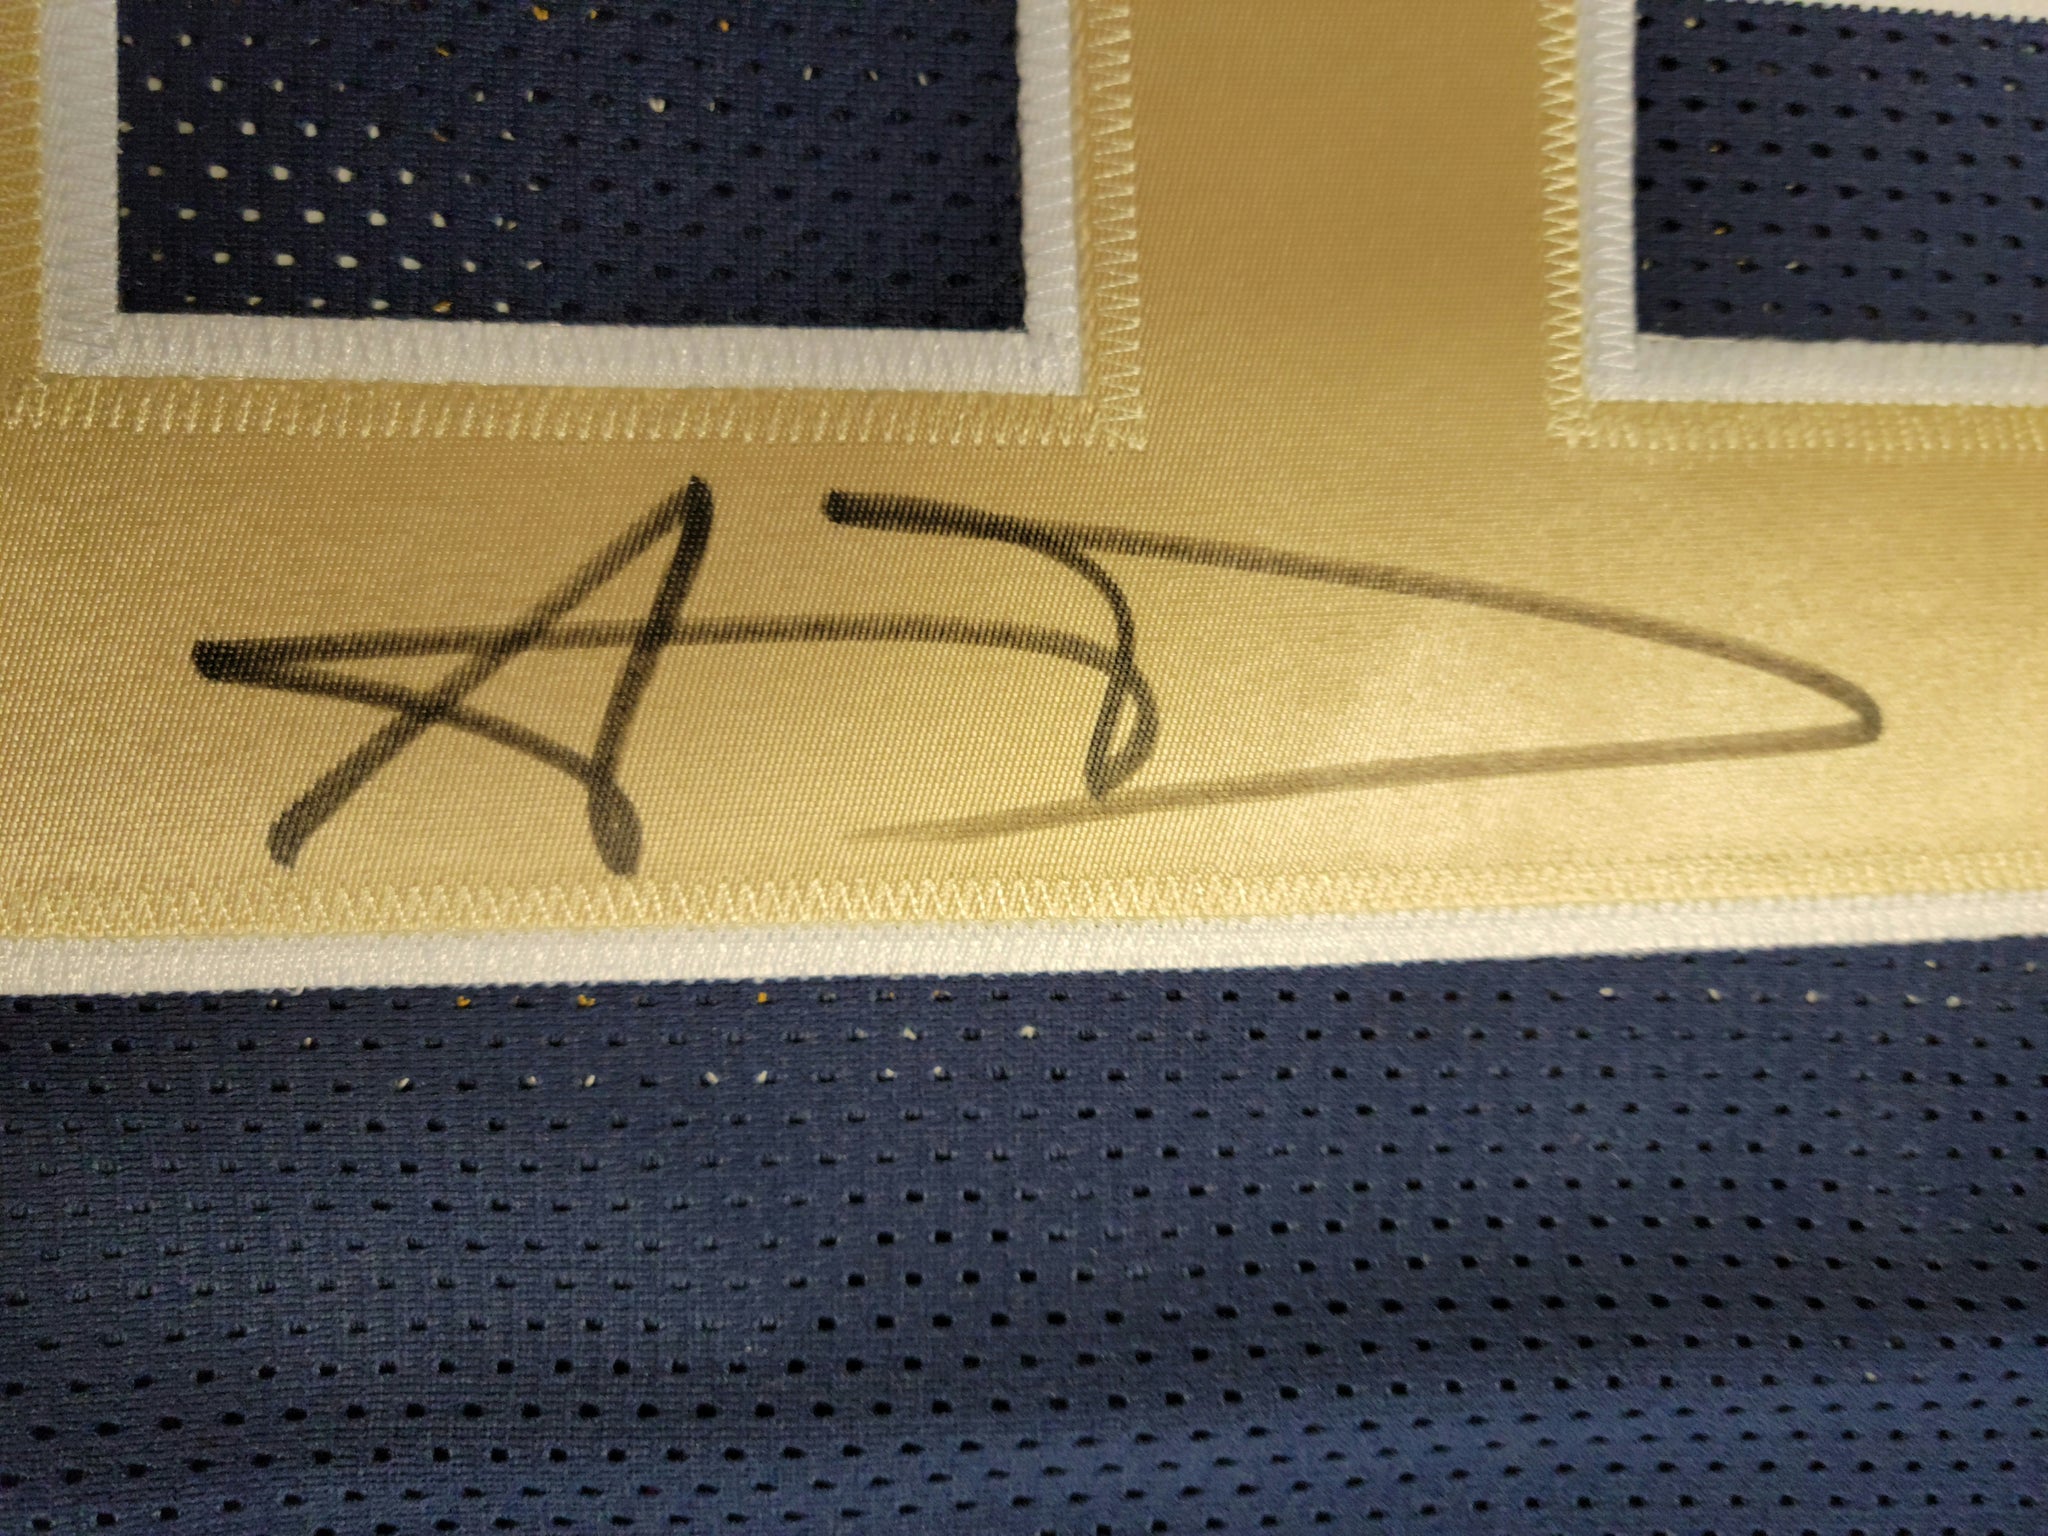 Aaron Donald Authentic Signed Pro Style Jersey Autographed JSA